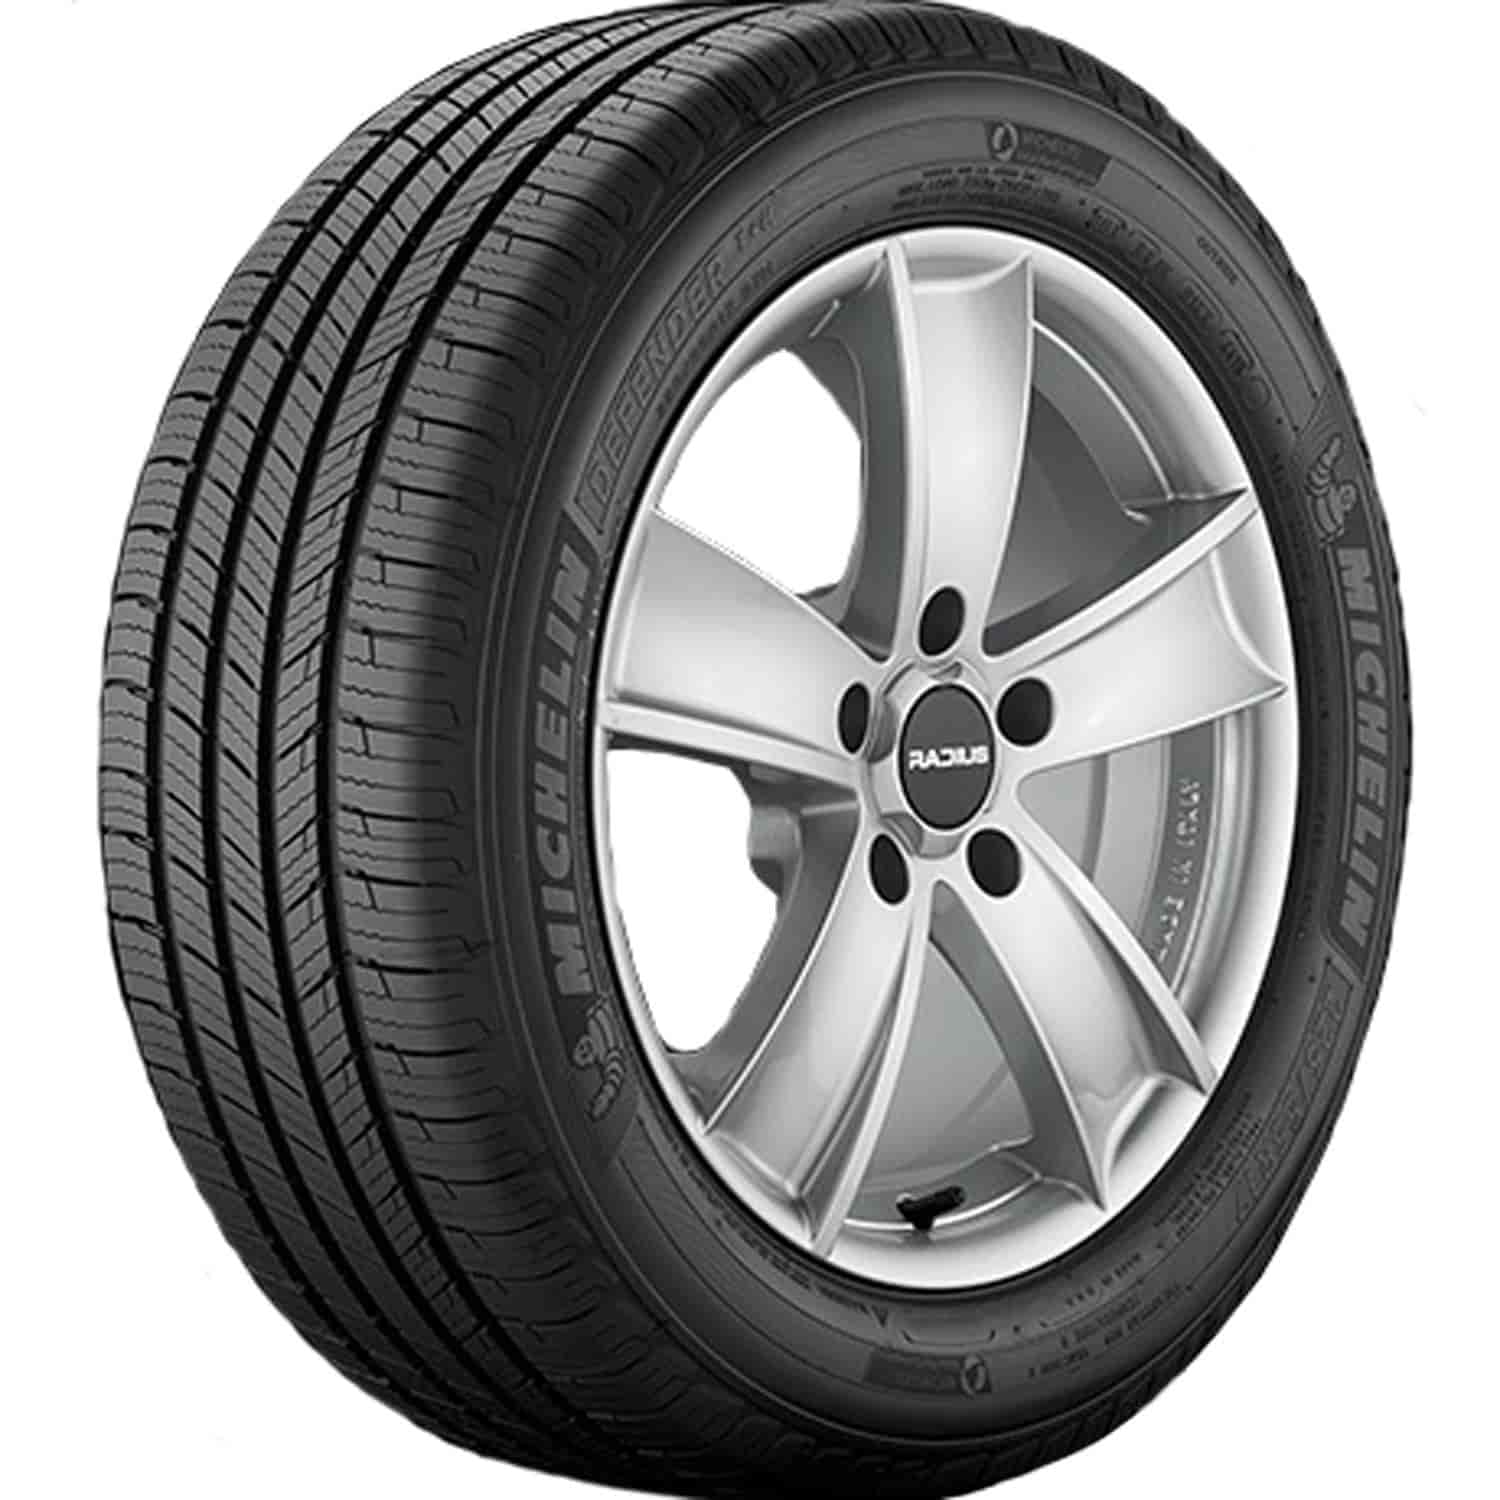 Defender T+H Tire Size:205/60R15